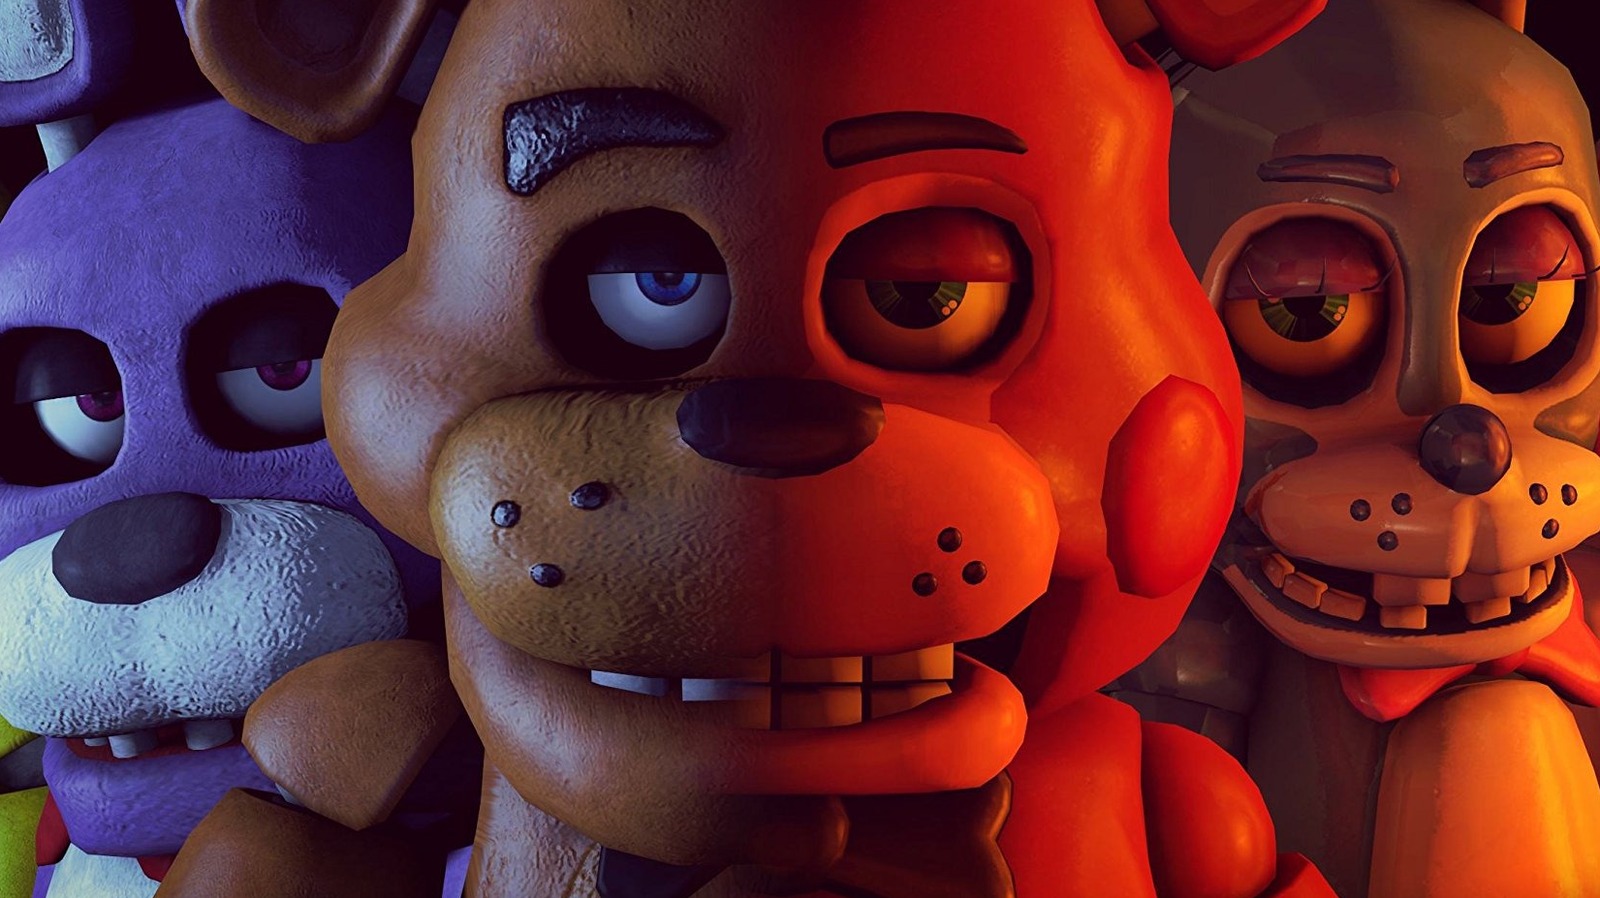 Five Nights at Freddy's' Trailer No. 2